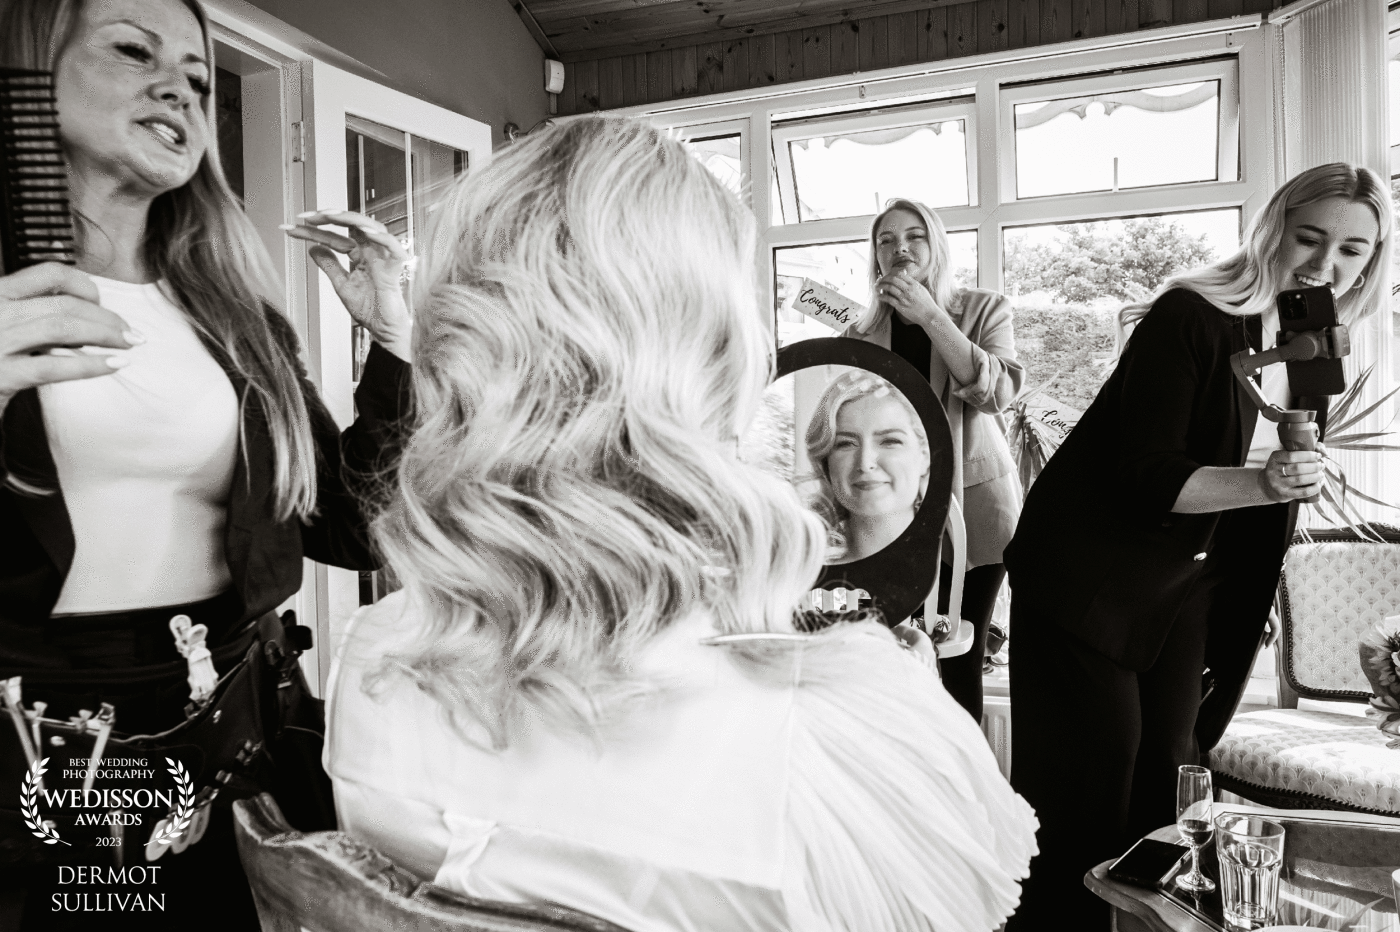 It was all go on Niamh's wedding morning with hair, makeup and content creator vying for space. I tucked myself in behind the bride and waited for everything to fall into place.